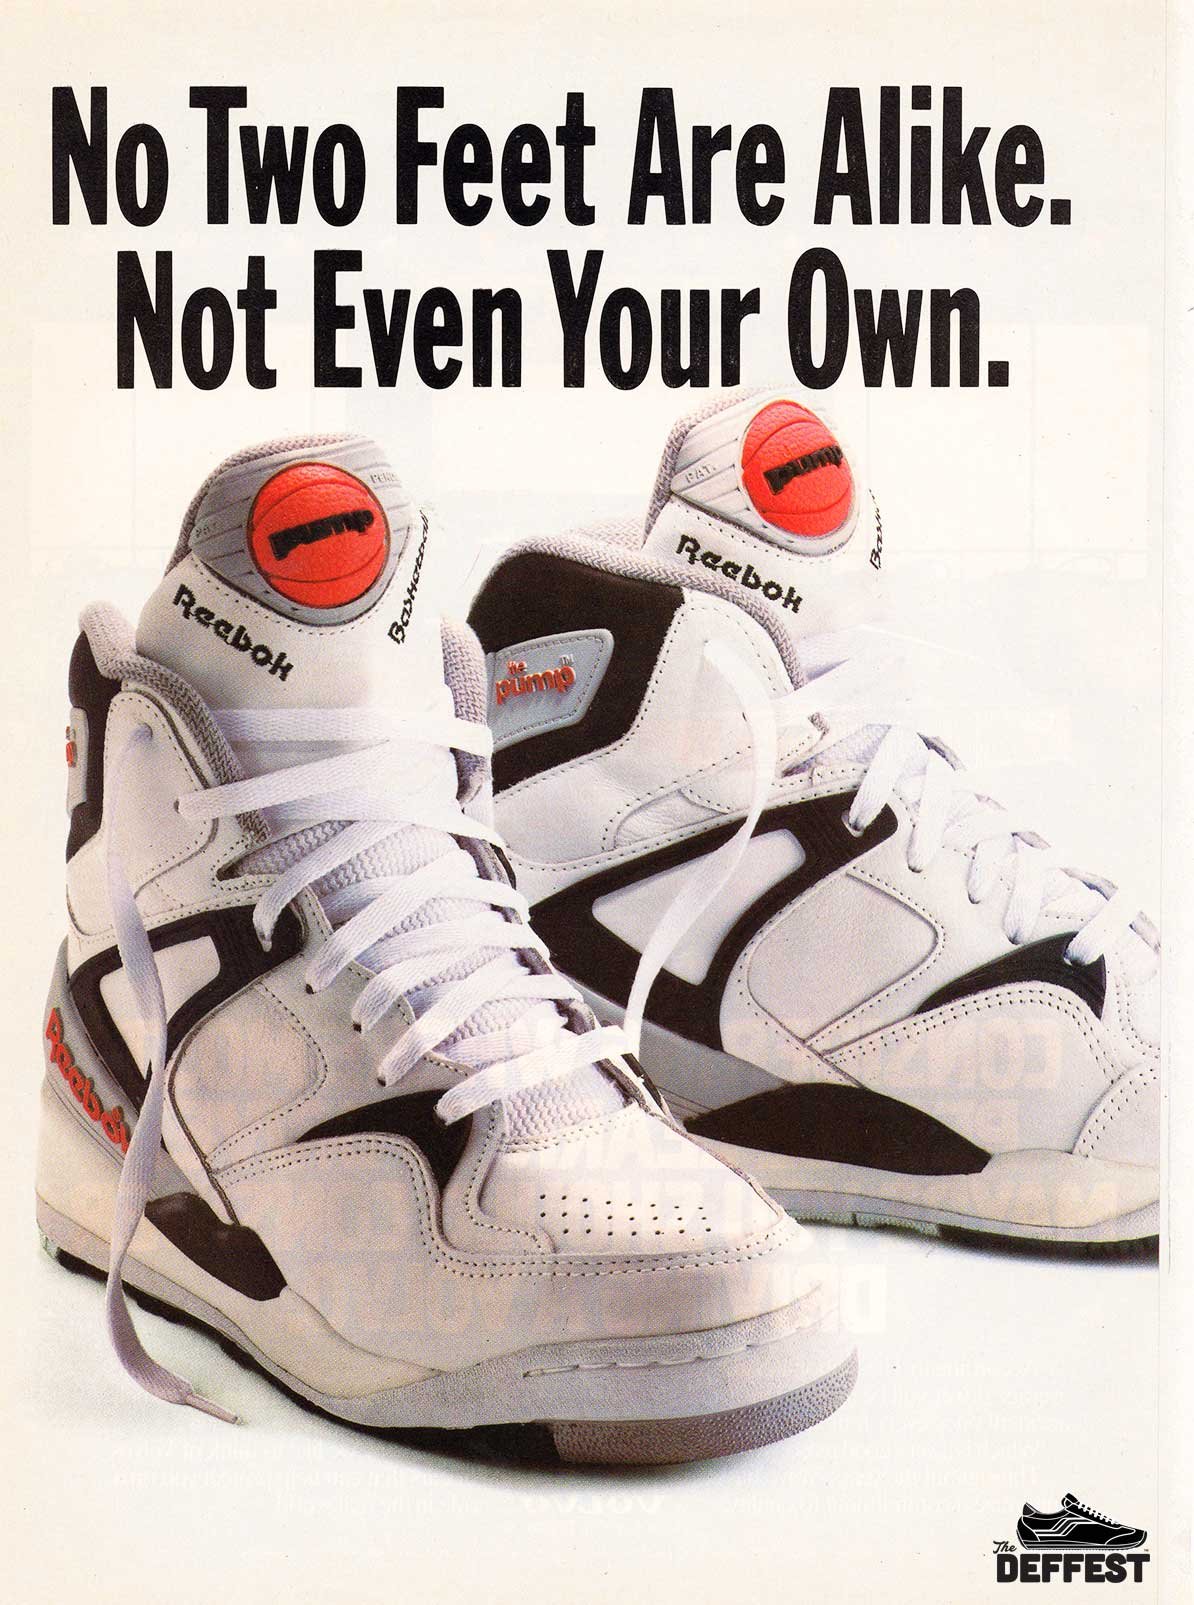 1980s basketball shoes